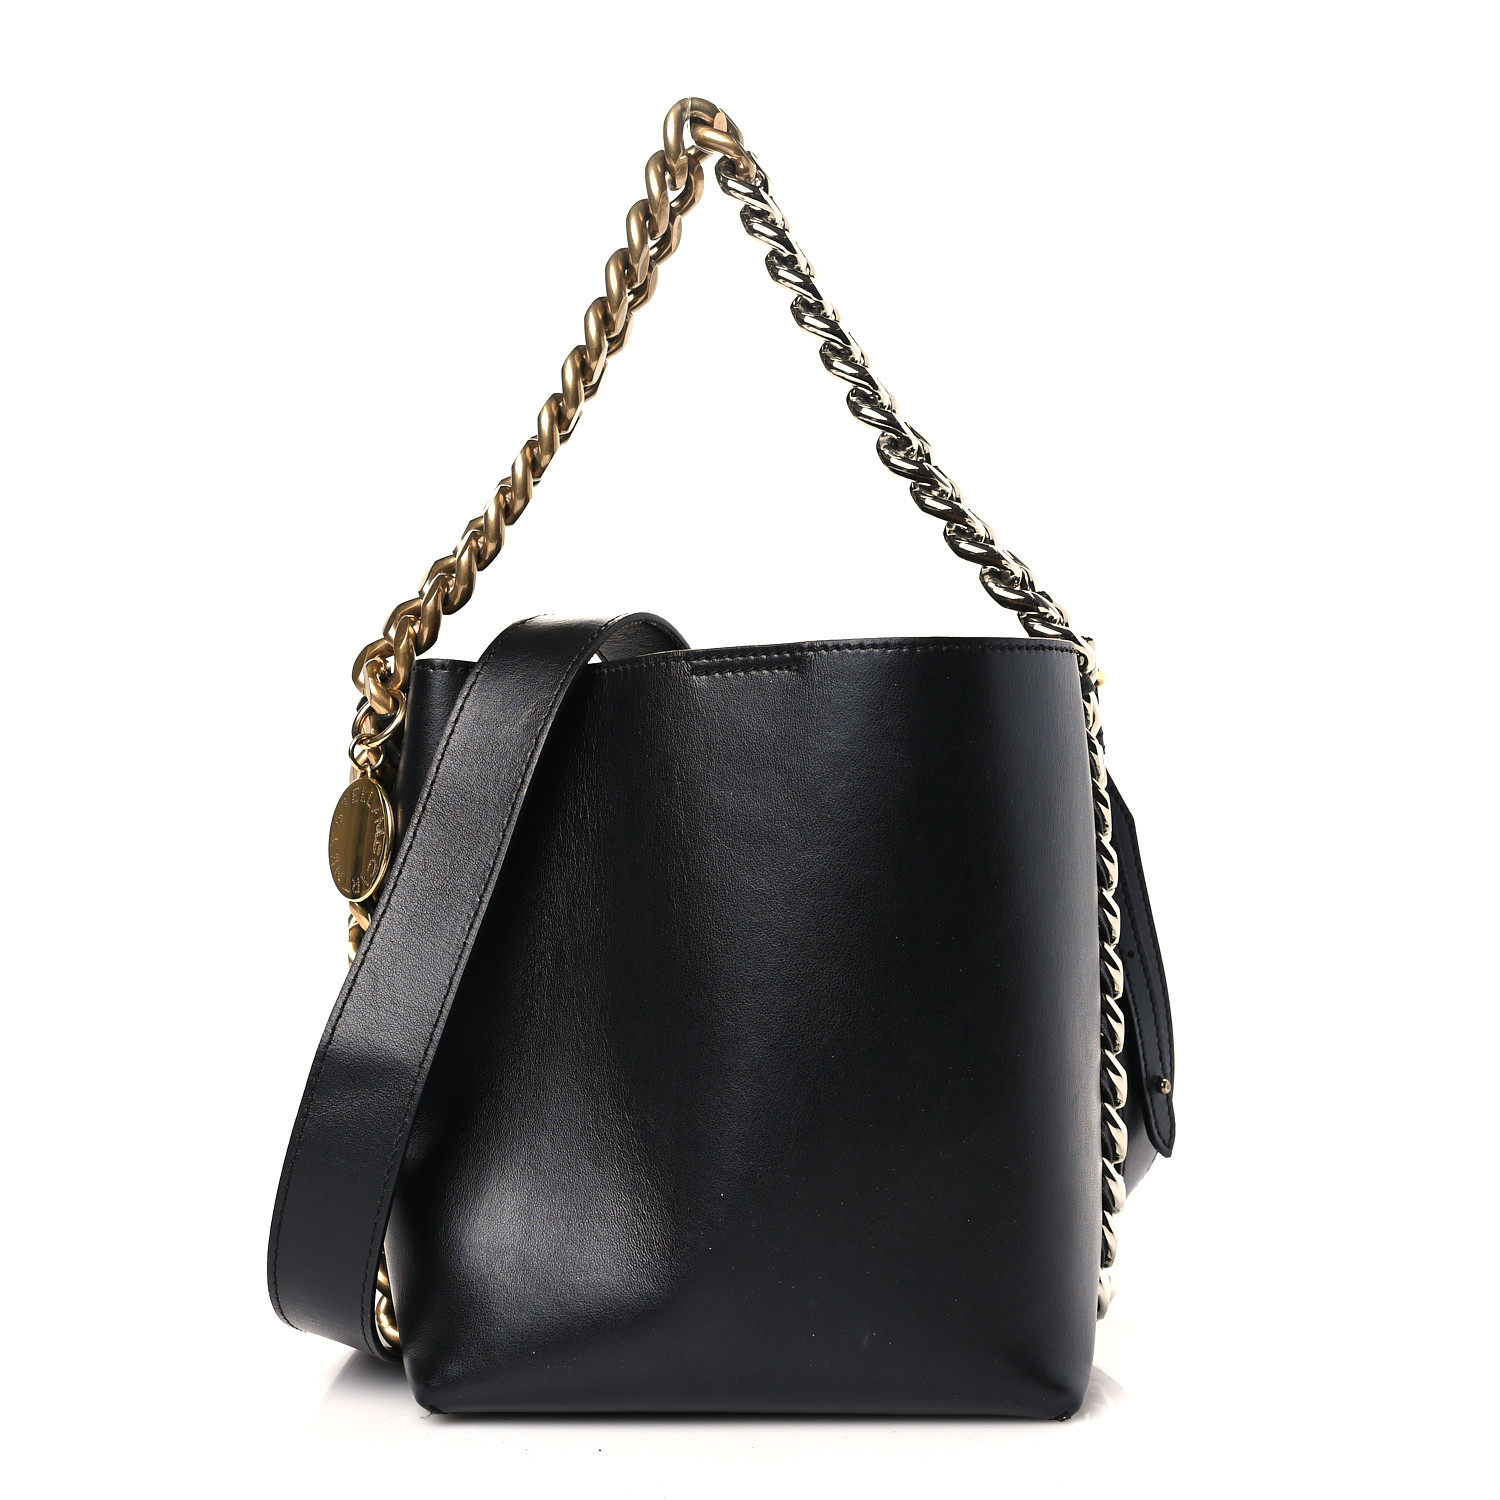 STELLA MCCARTNEY Eco Alter Nappa Frayme Bucket Bag in the color Black by FASHIONPHILE